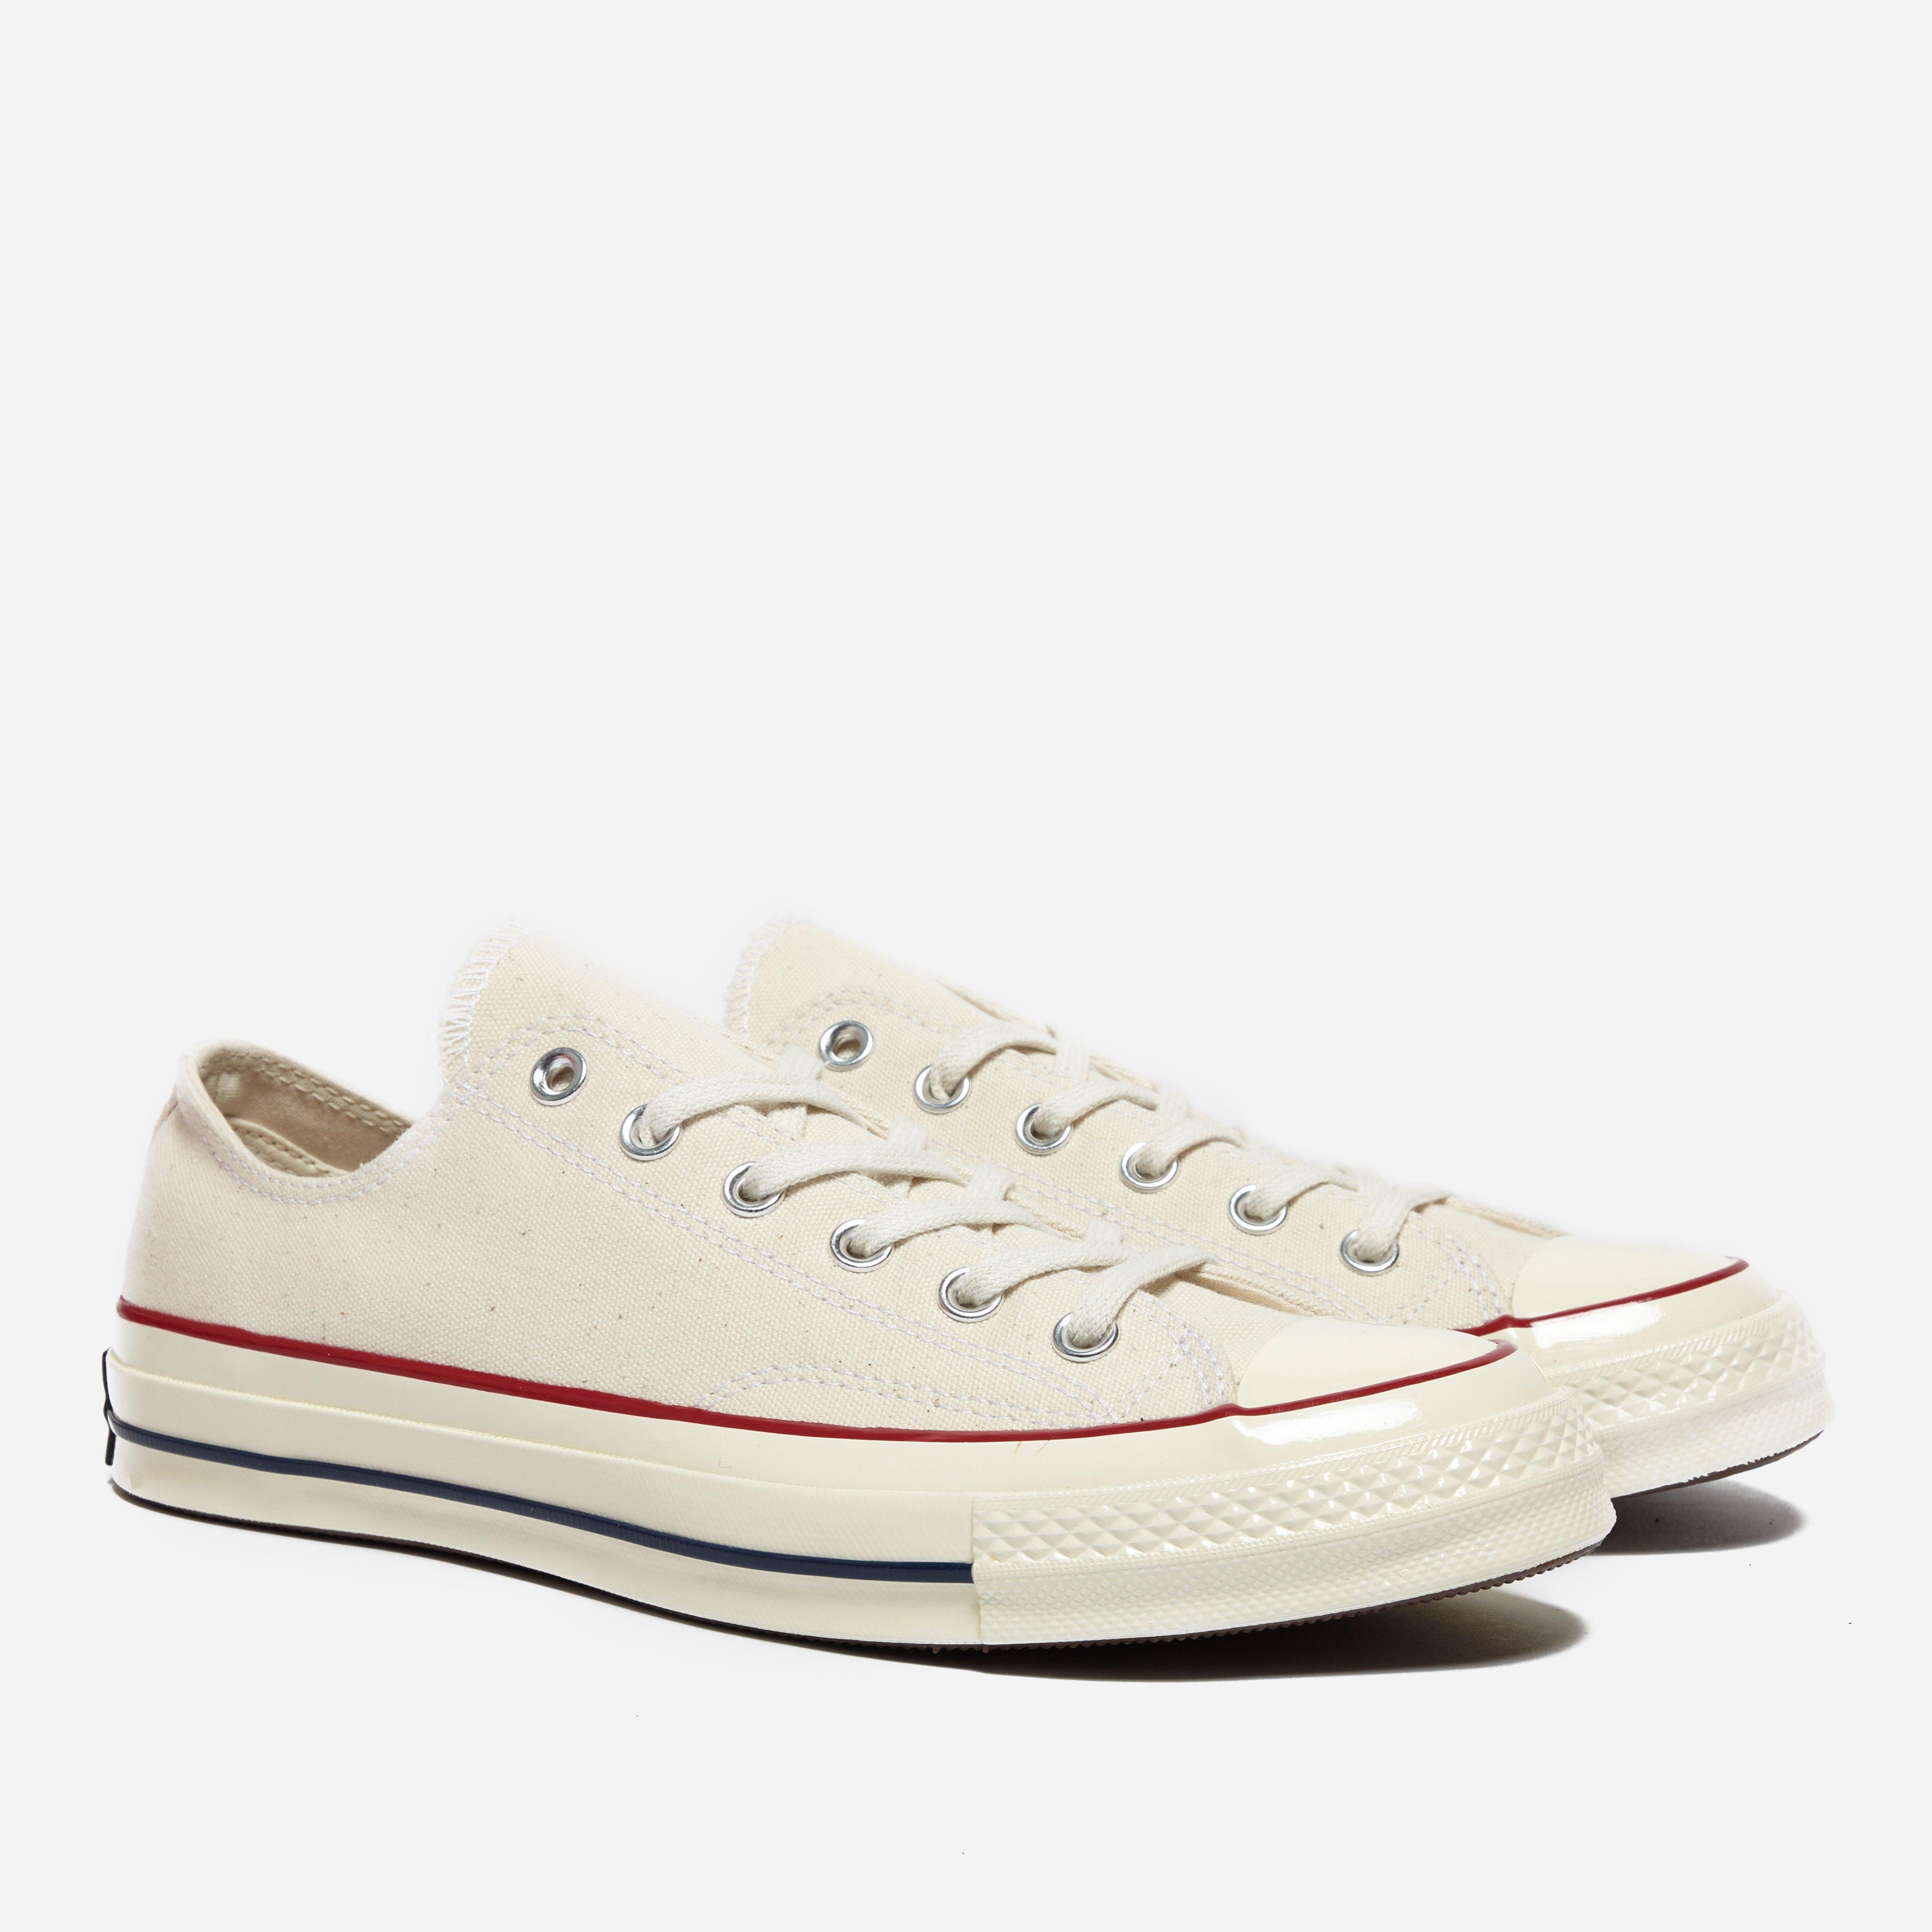 Lyst - Converse Chuck Taylor All Star 1970 Ox Parchment in White for Men